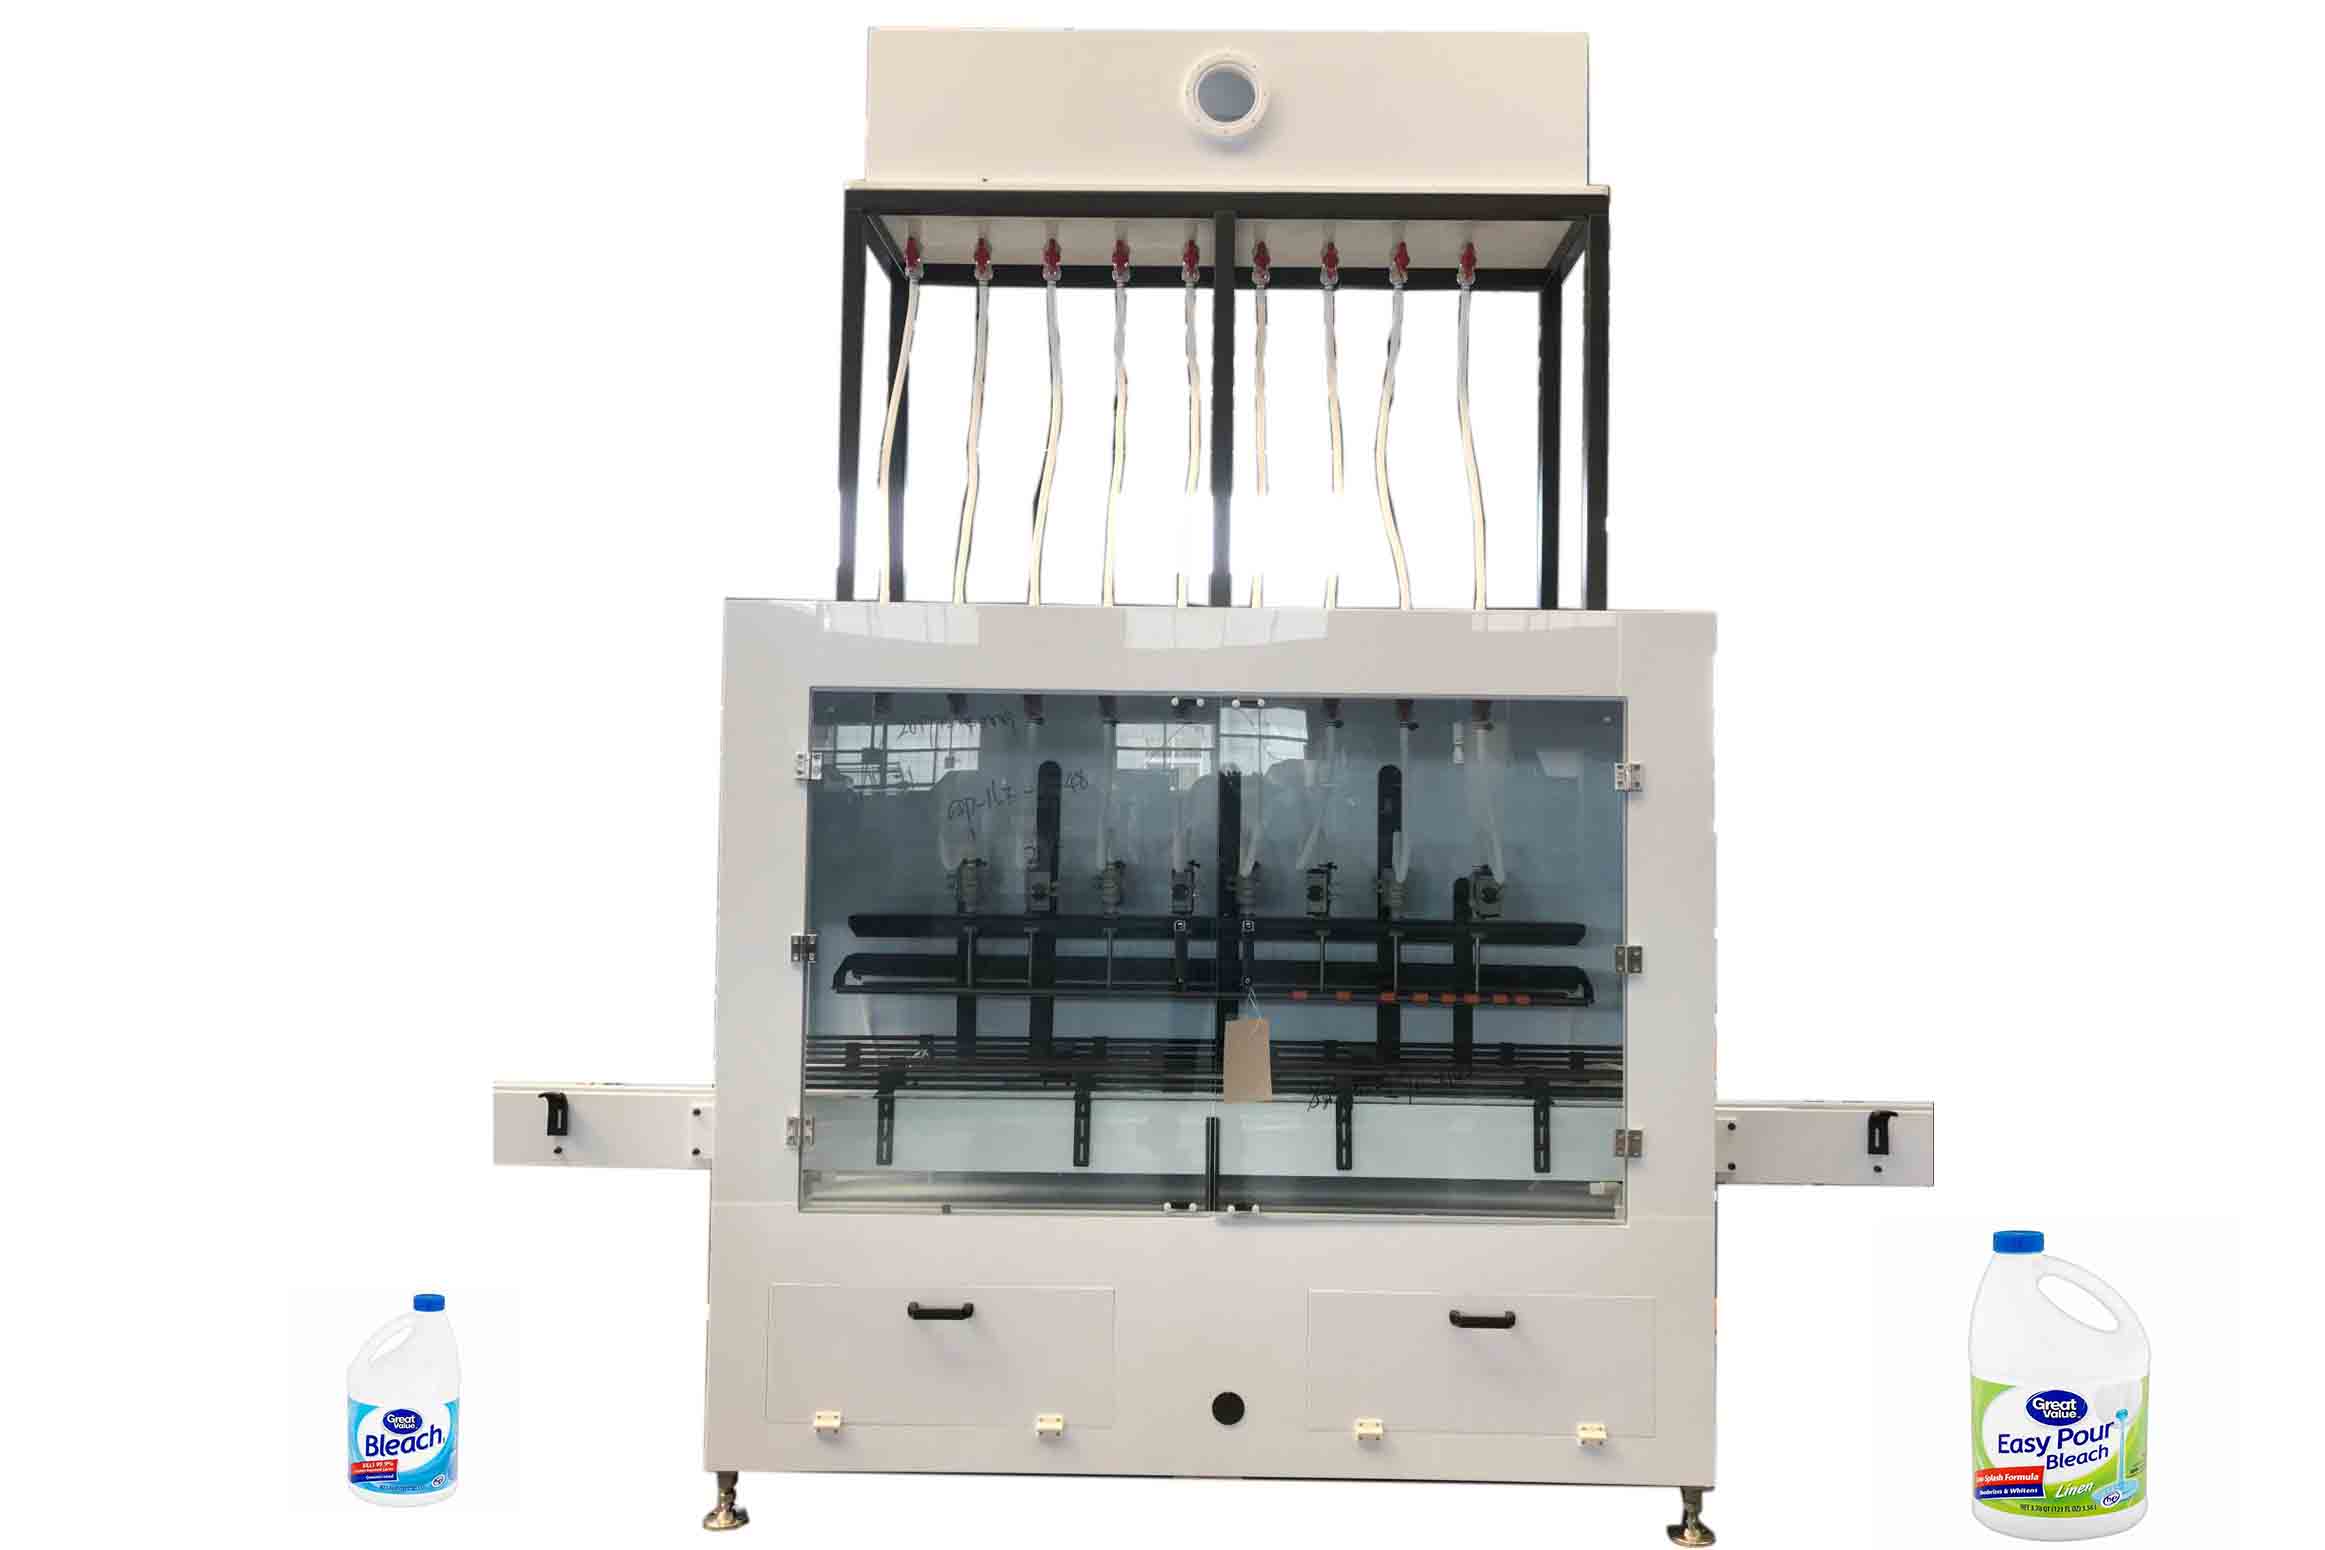 PLC Control 10 Heads Gravity Bottle Filling Machine For 1 - 5L Bleach Cleaner